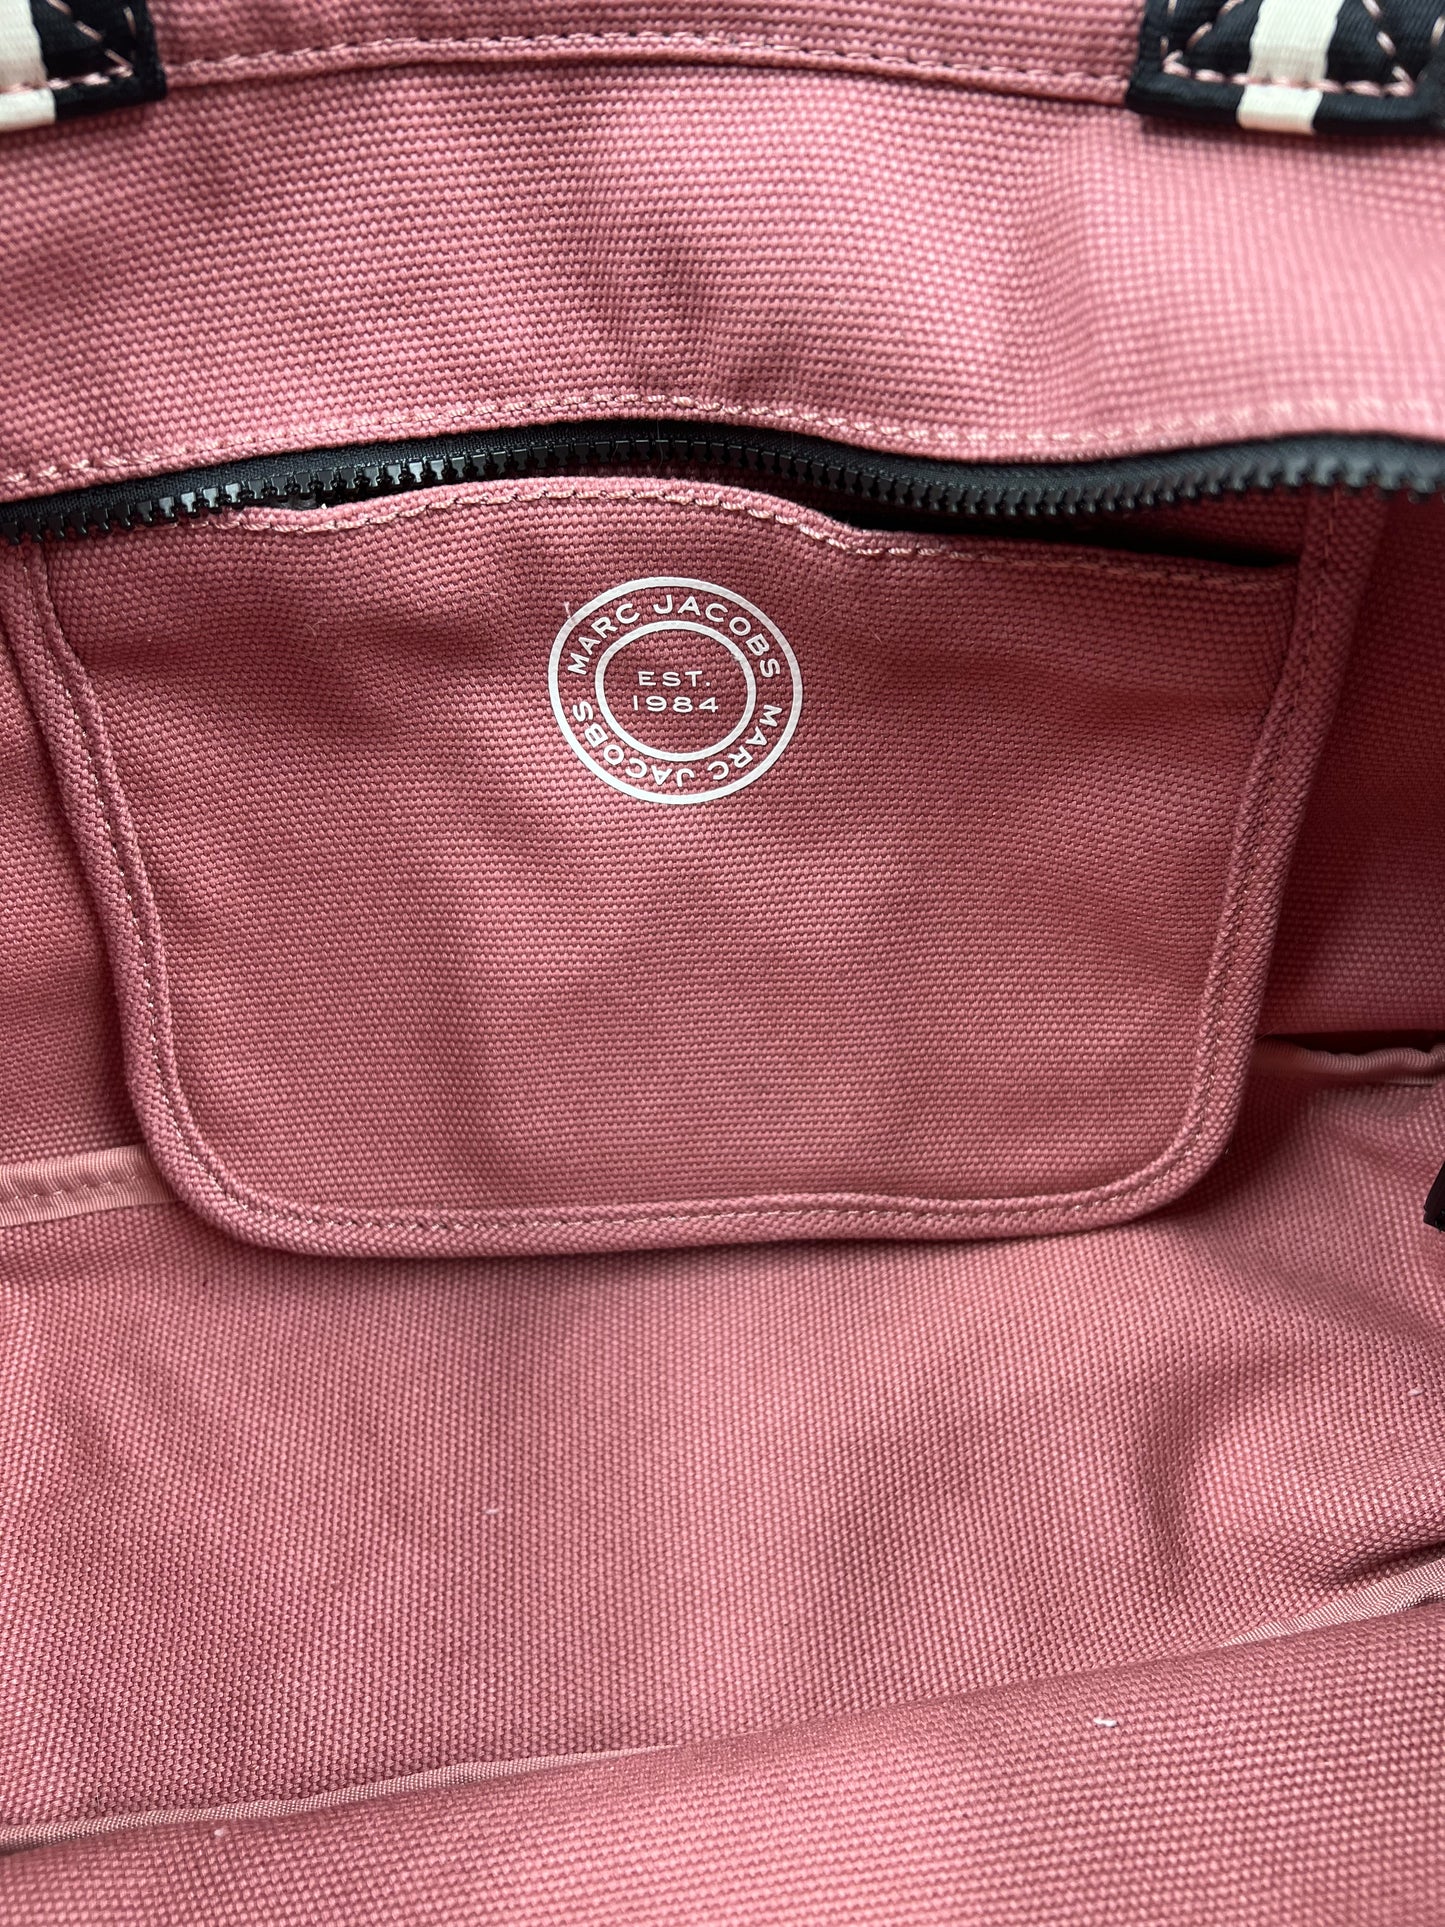 Marc Jacobs Dusty Rose Medium Signet Canvas Tote